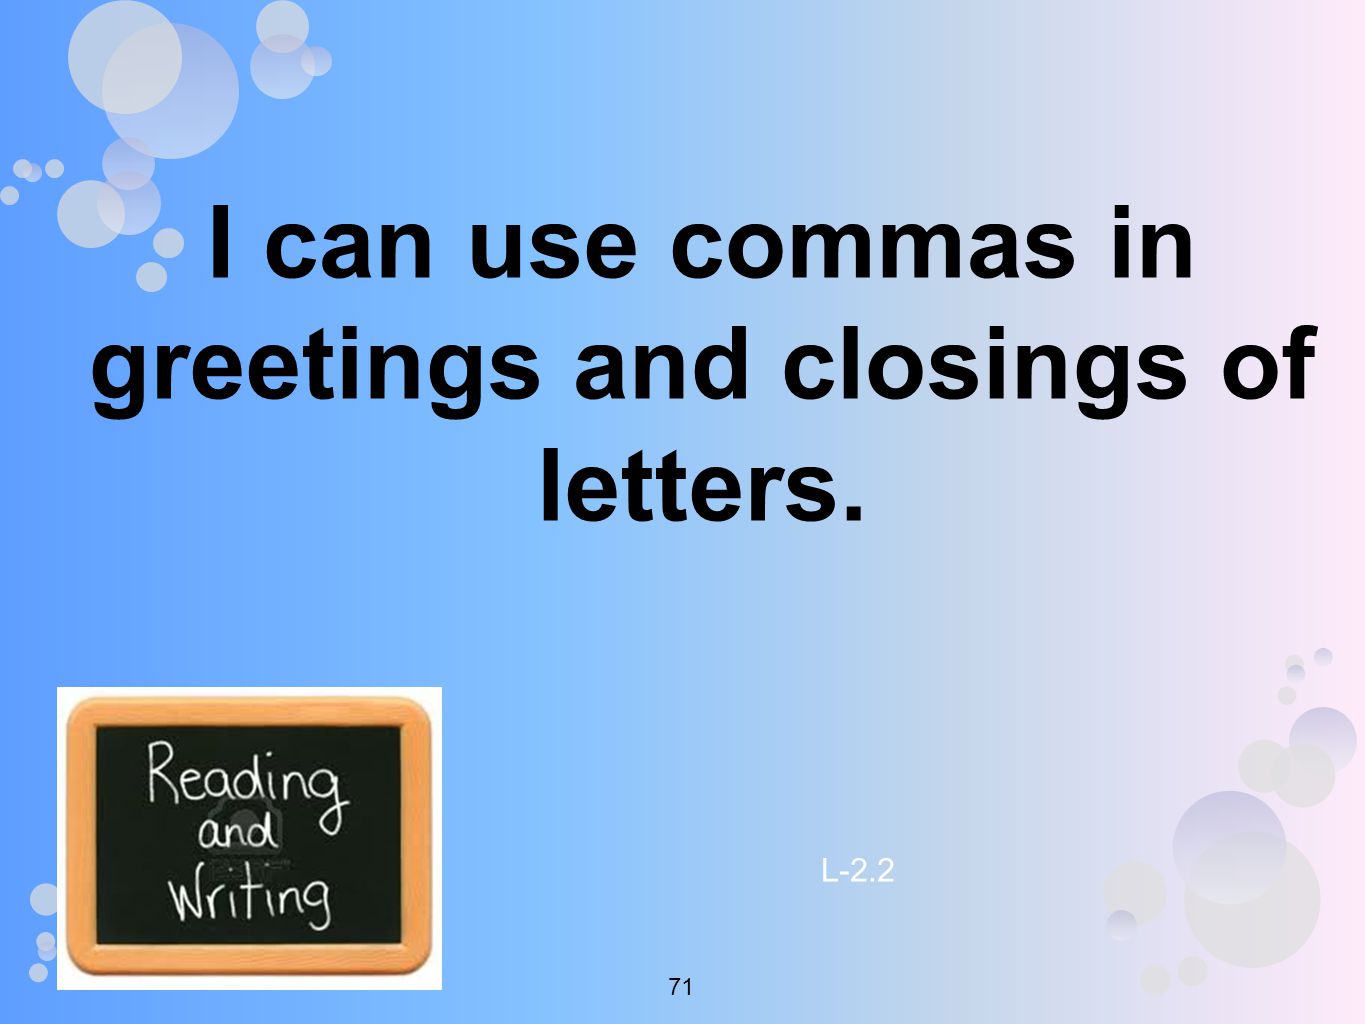 I can use commas in greetings and closings of letters. L